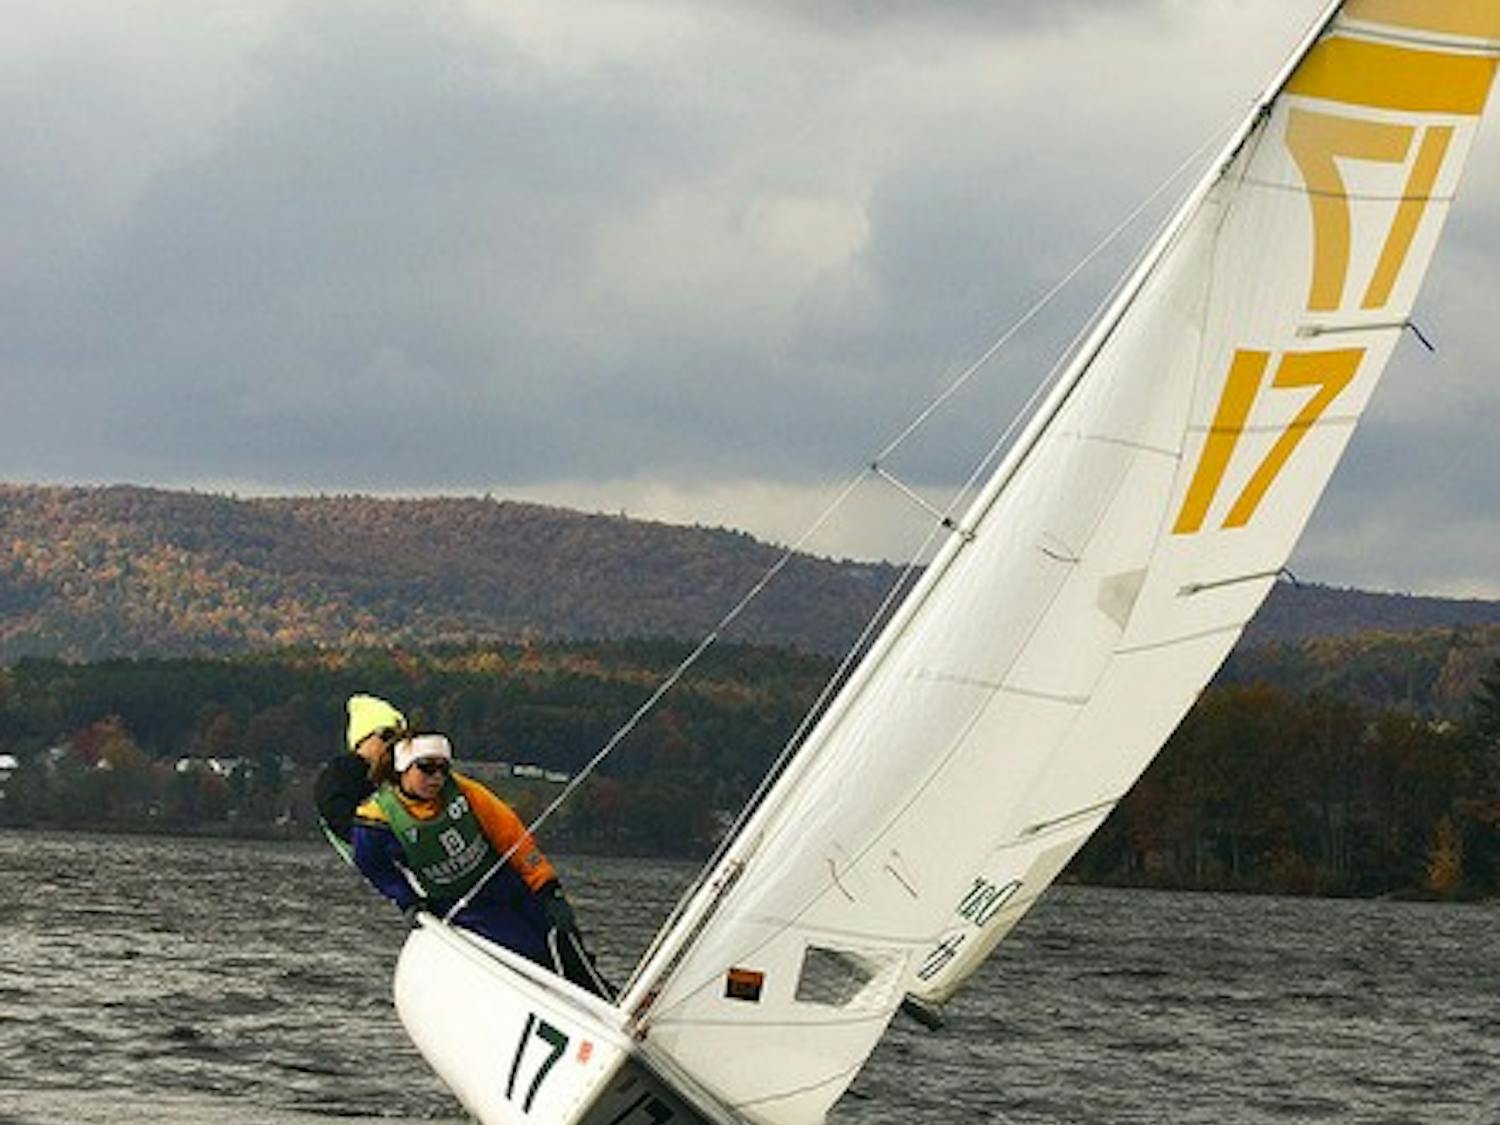 The sailing team competed in four regattas over the weekend, improving from their opening week.